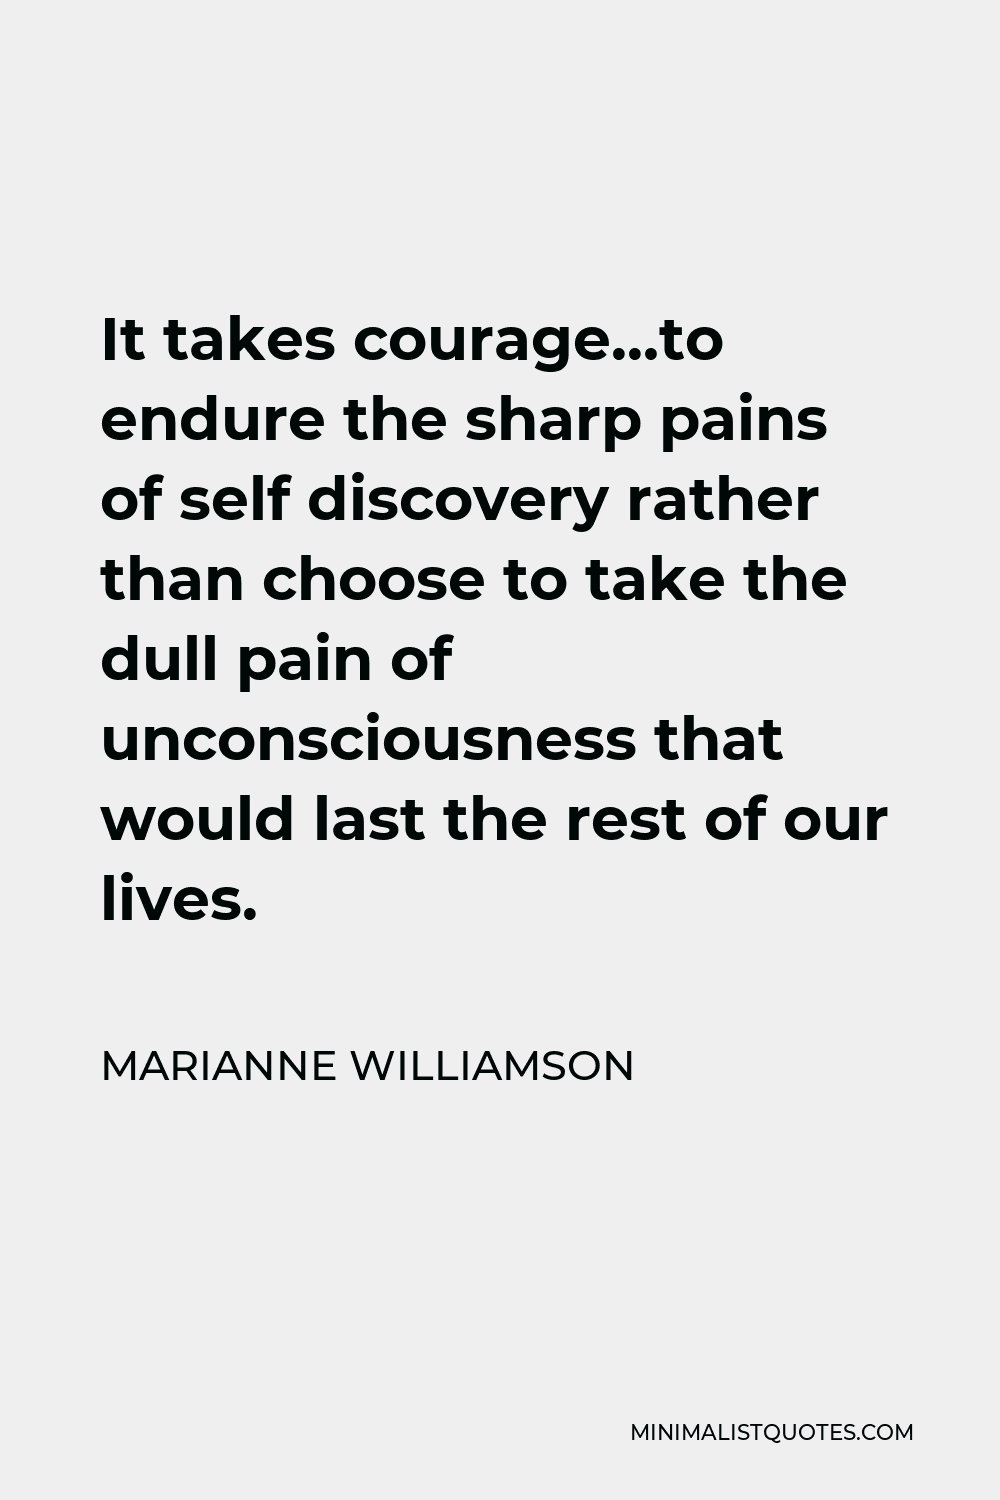 Marianne Williamson Quote - It takes courage…to endure the sharp pains of self discovery rather than choose to take the dull pain of unconsciousness that would last the rest of our lives.